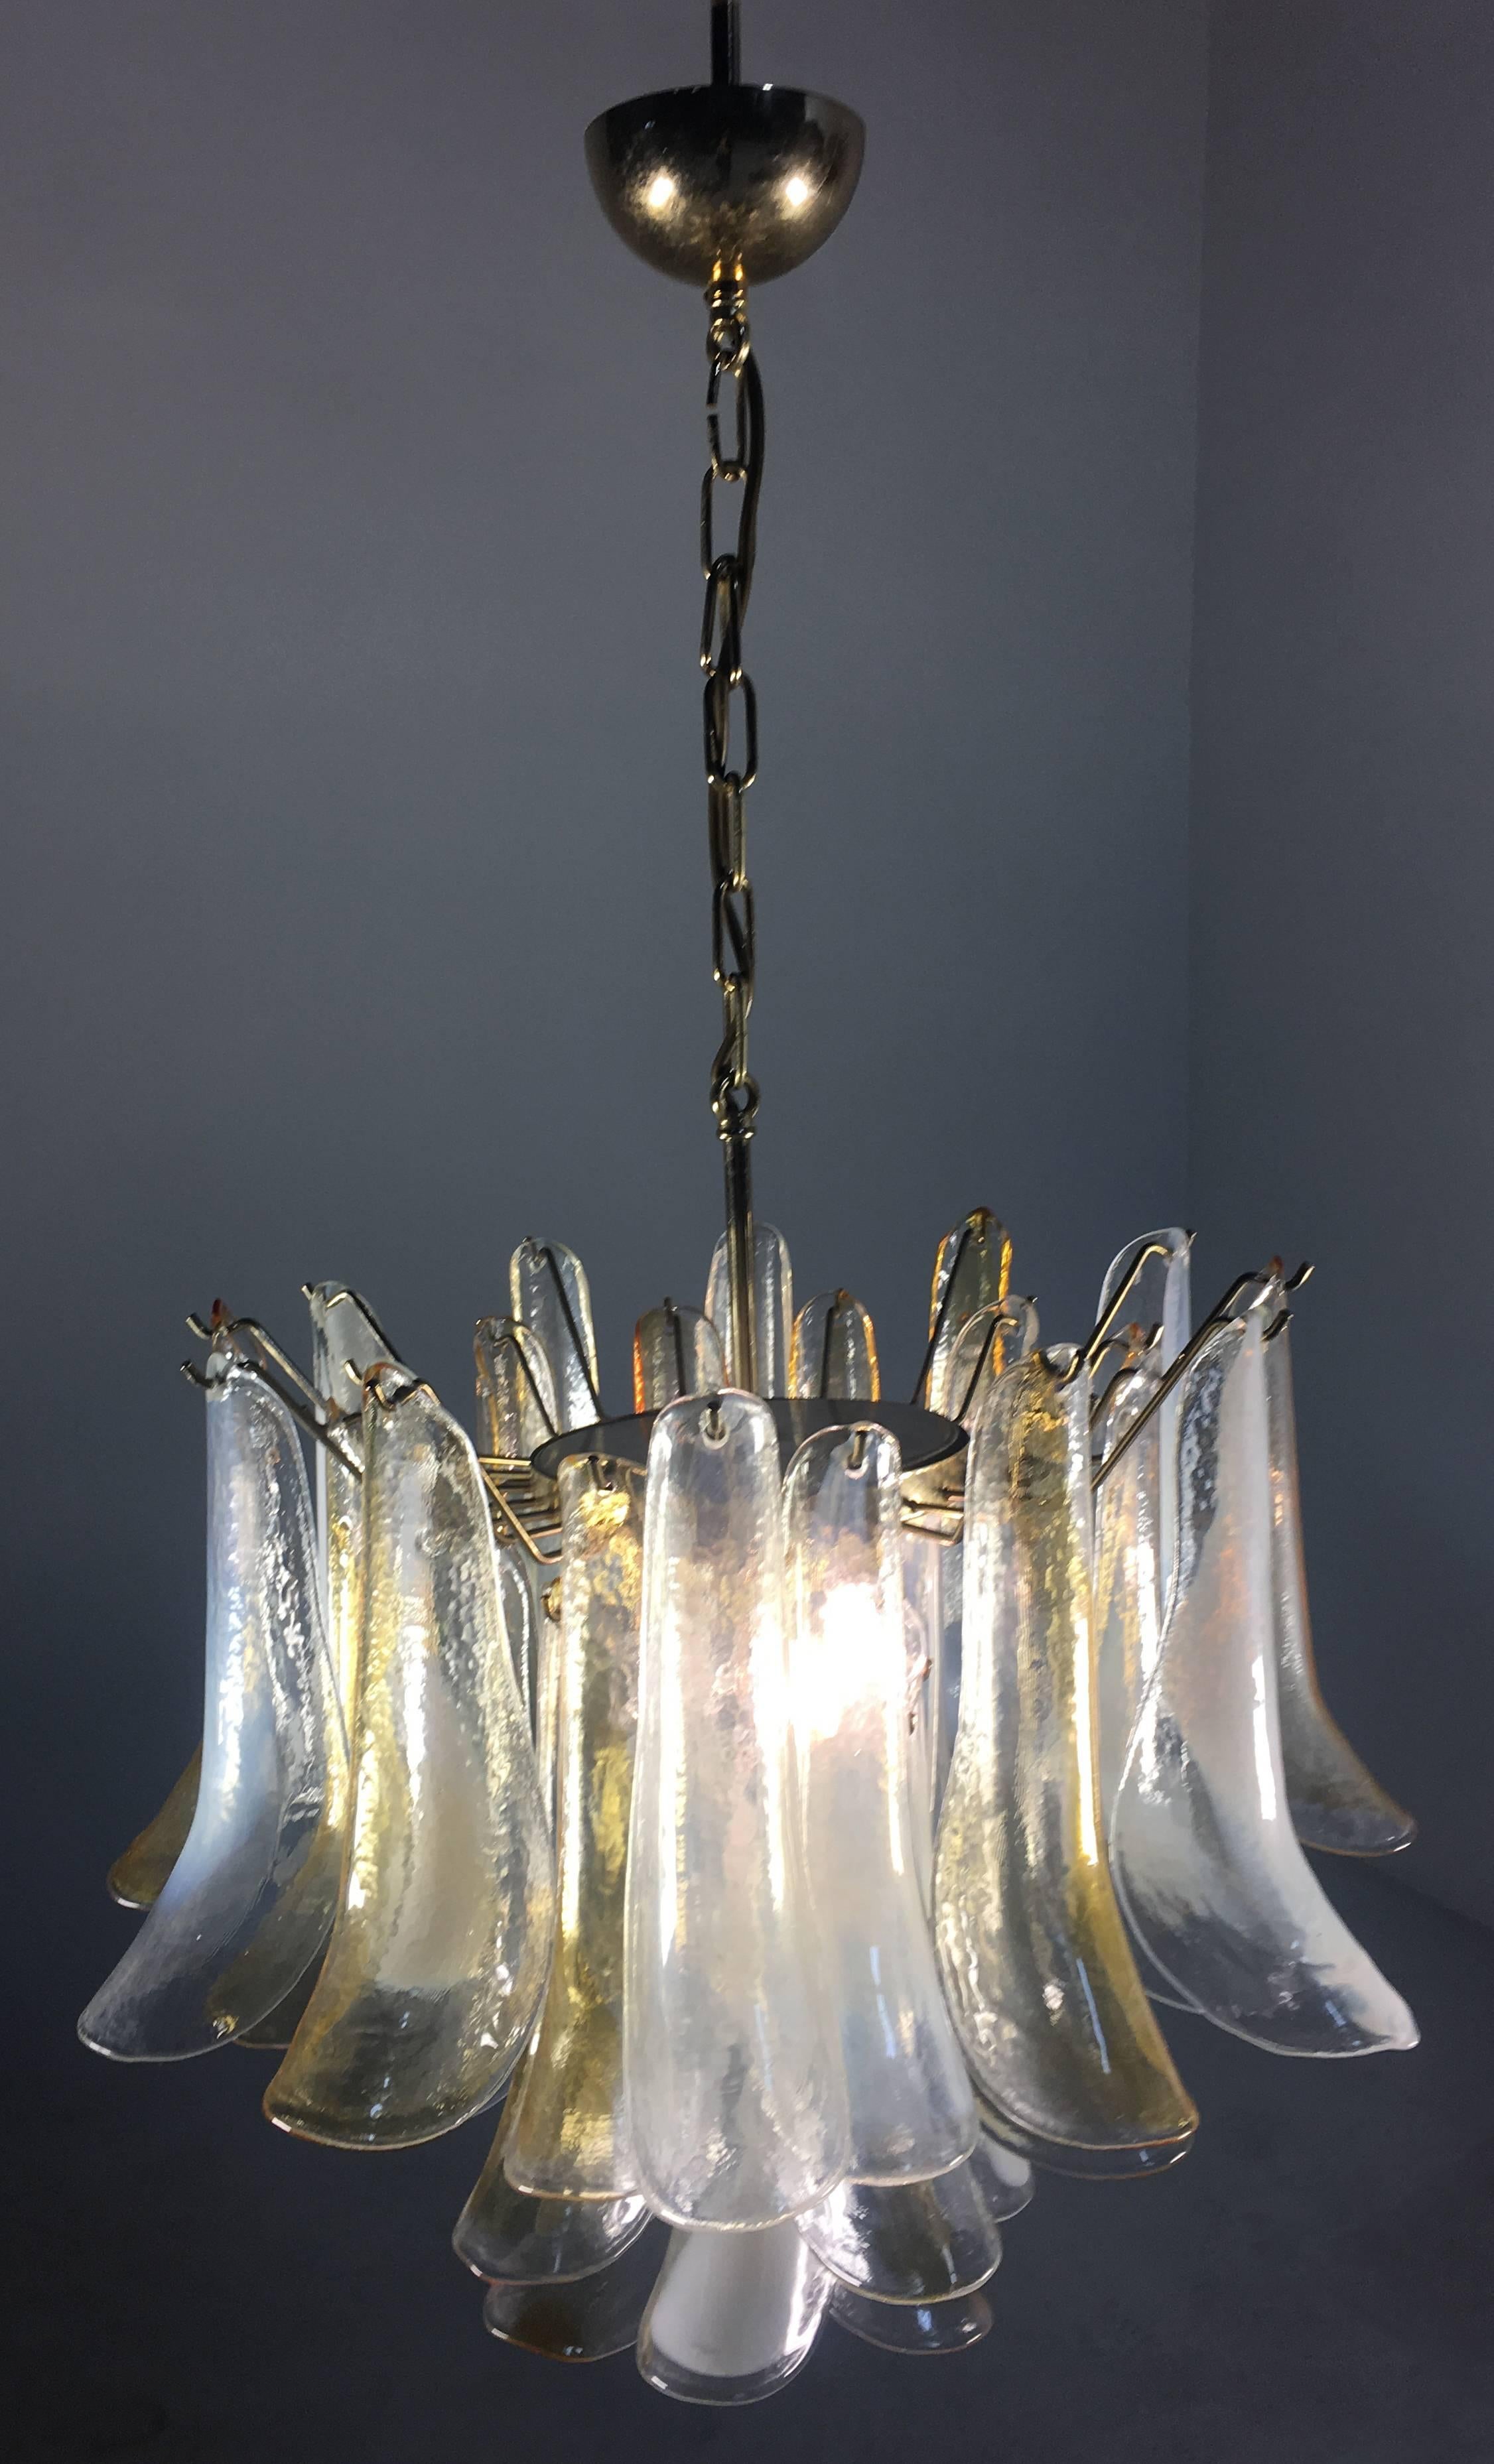 Elegant Pair of Chandeliers White and Amber Petals, Murano, 1990s For Sale 2